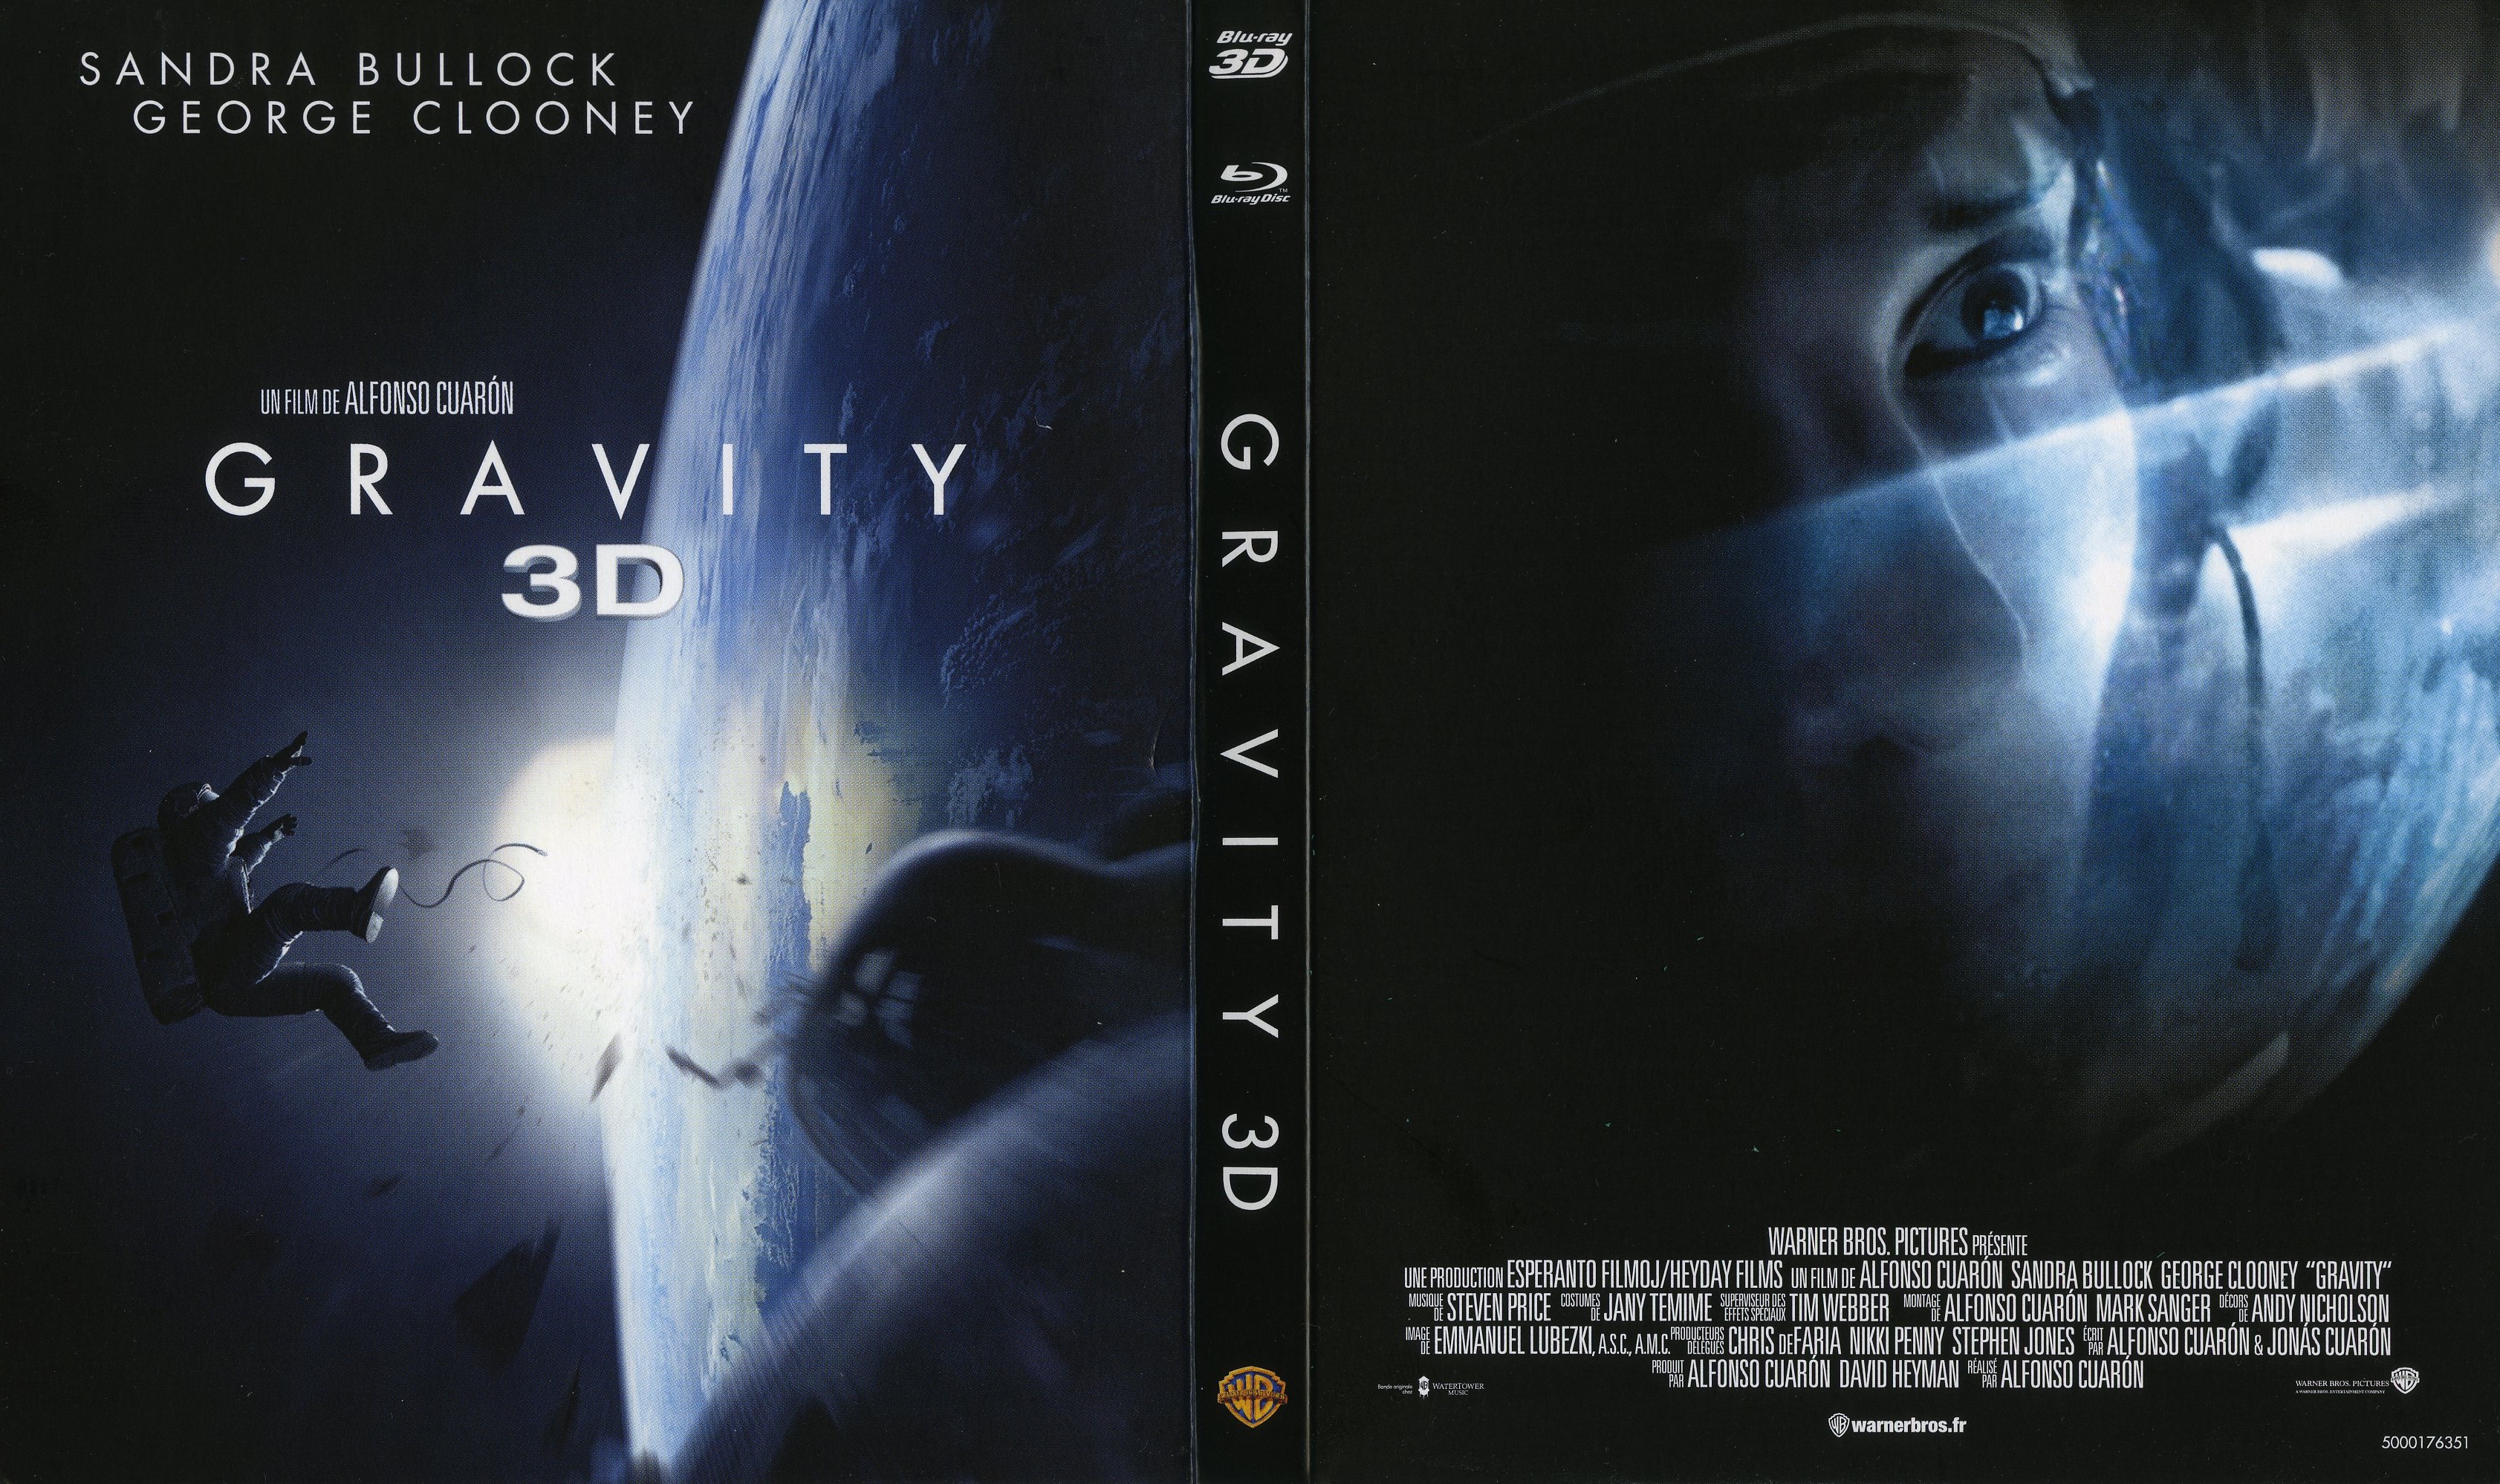 Jaquette DVD Gravity 3D (BLU-RAY)